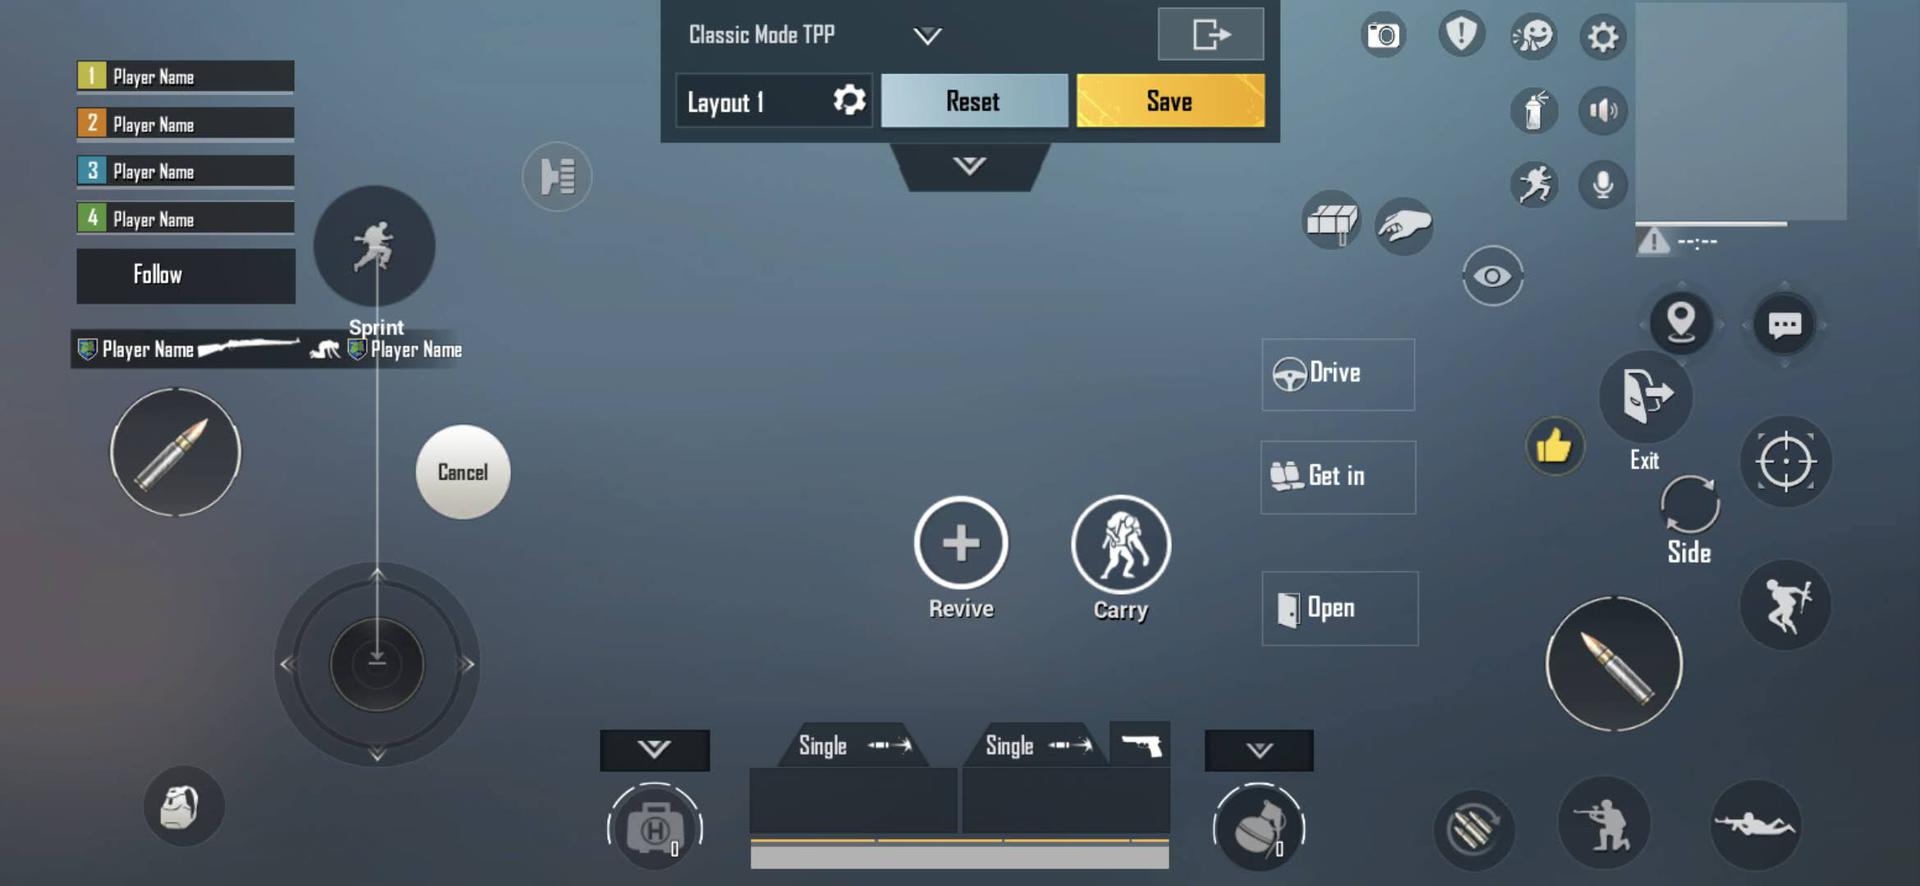 Customize buttons in PUBG Mobile controller 2